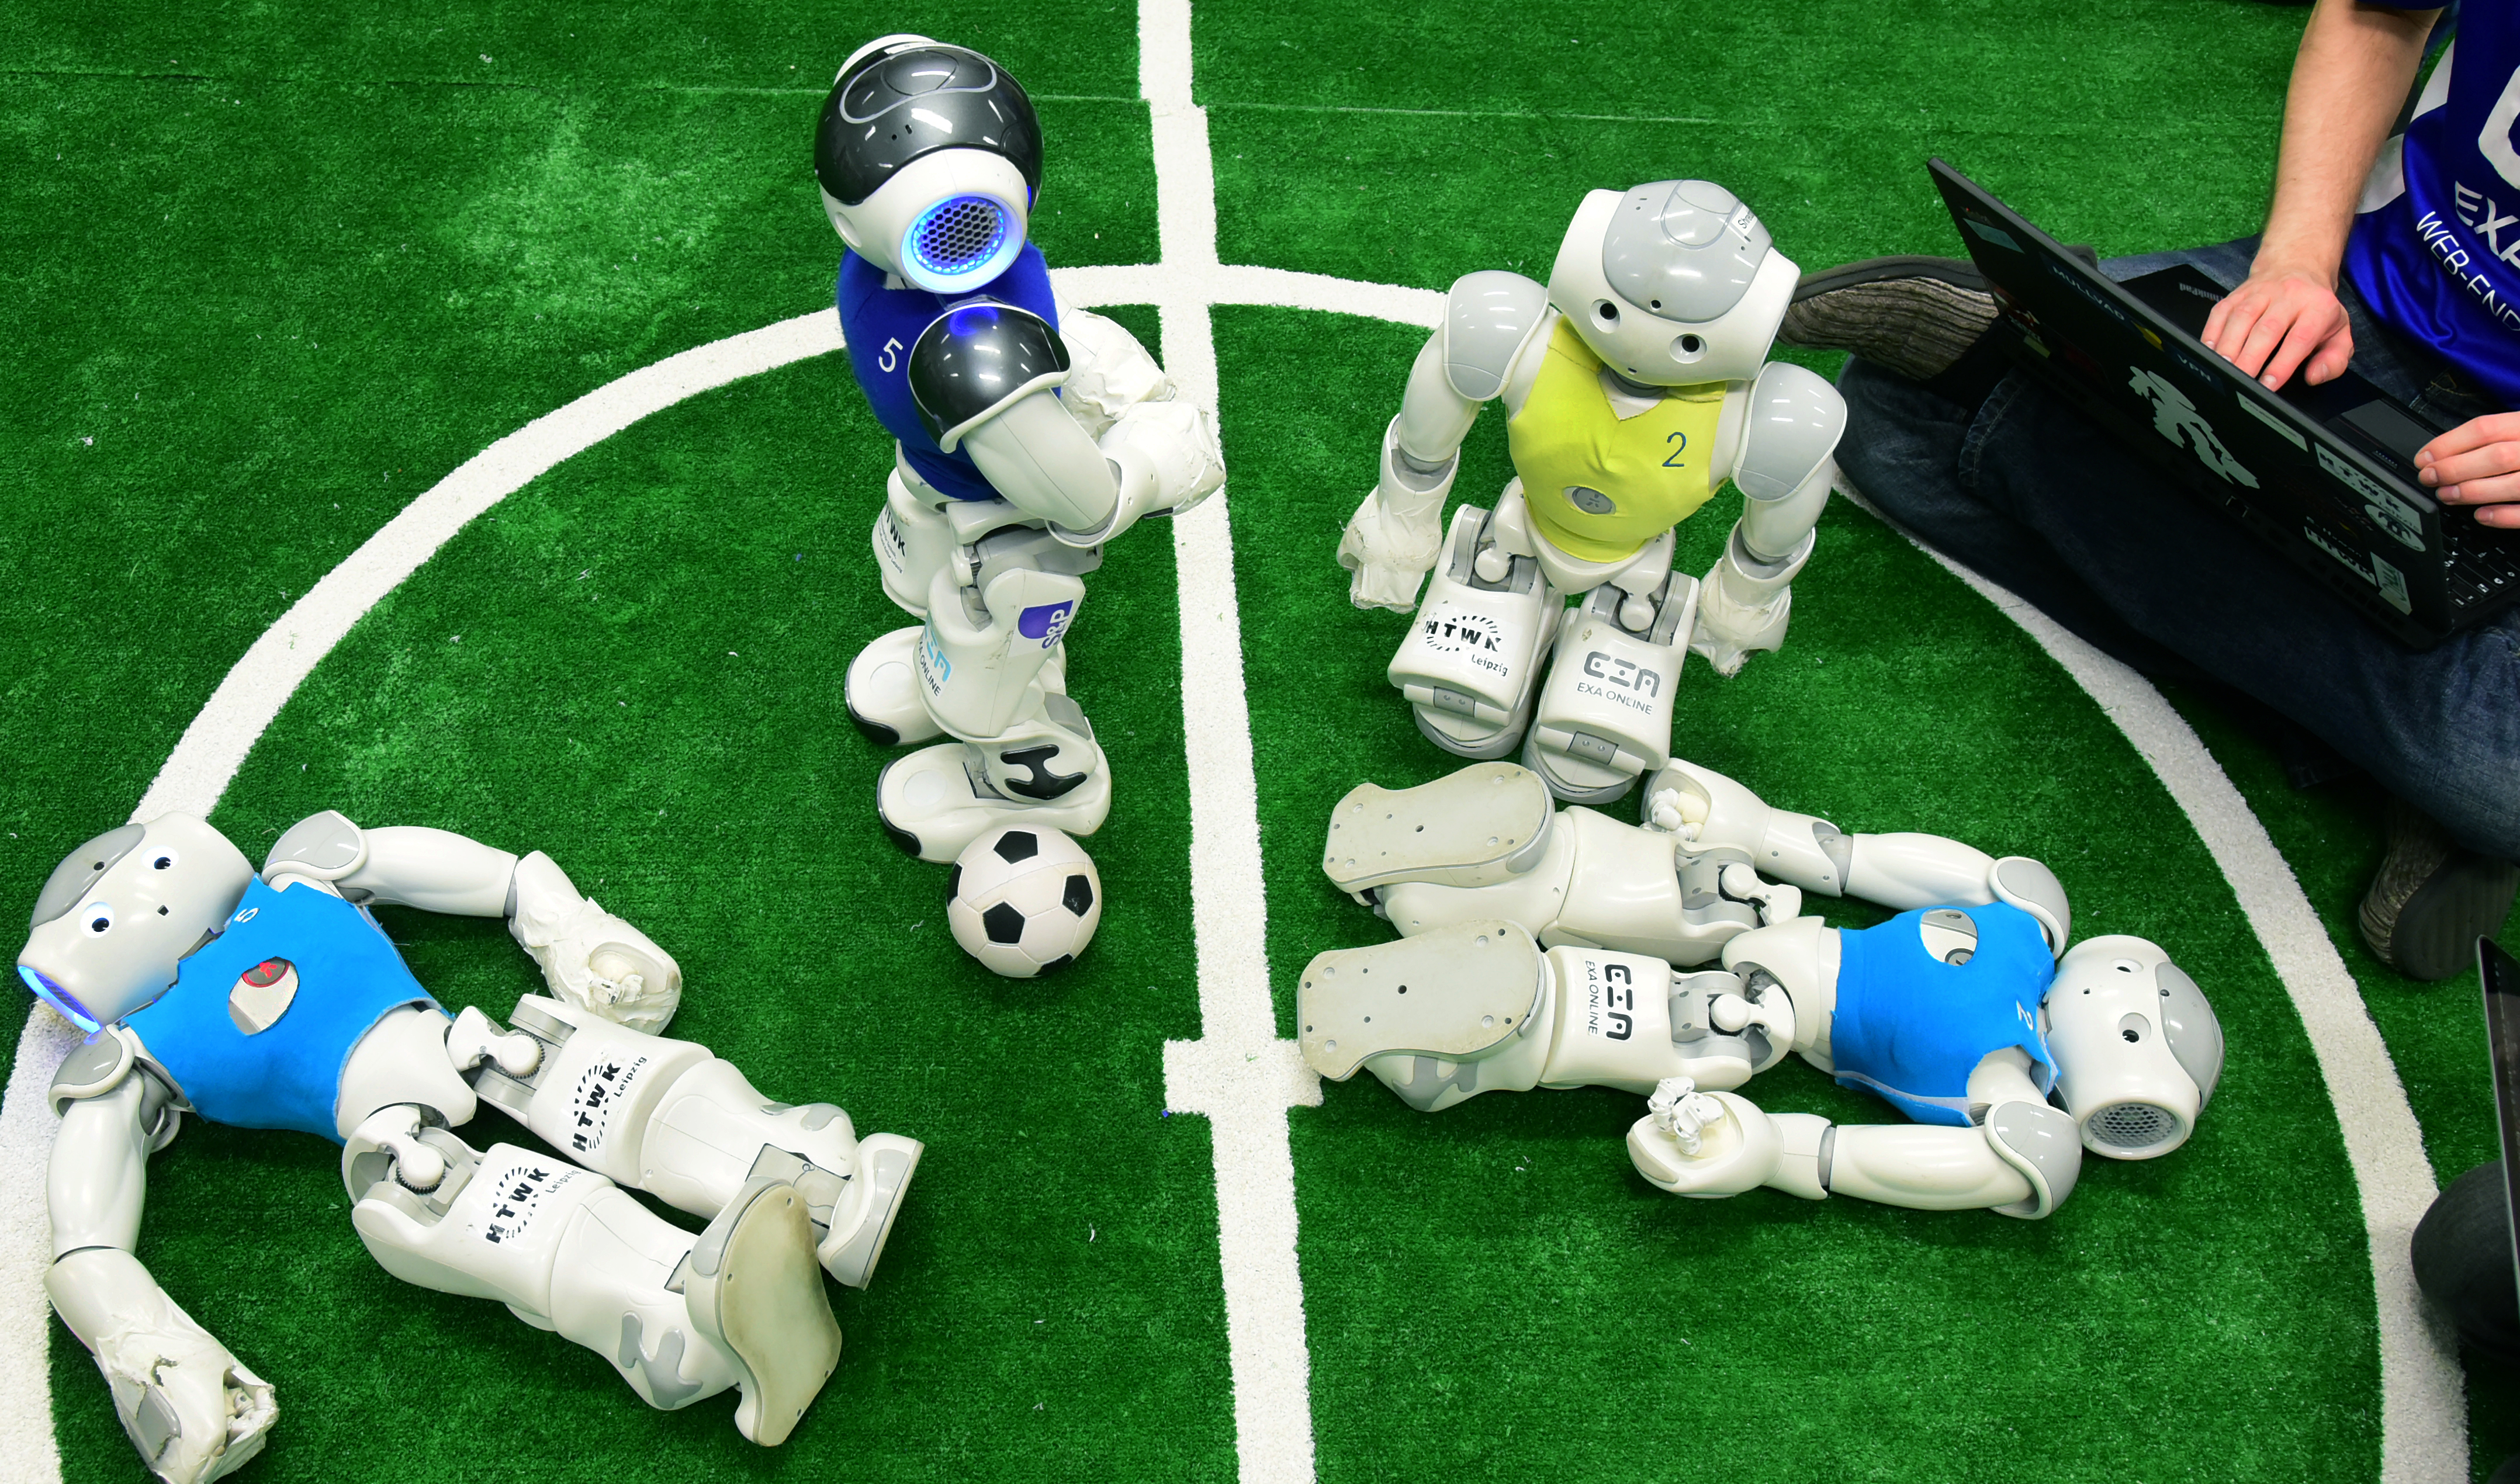 Nao-Team wants to win World Cup title with soccer robots